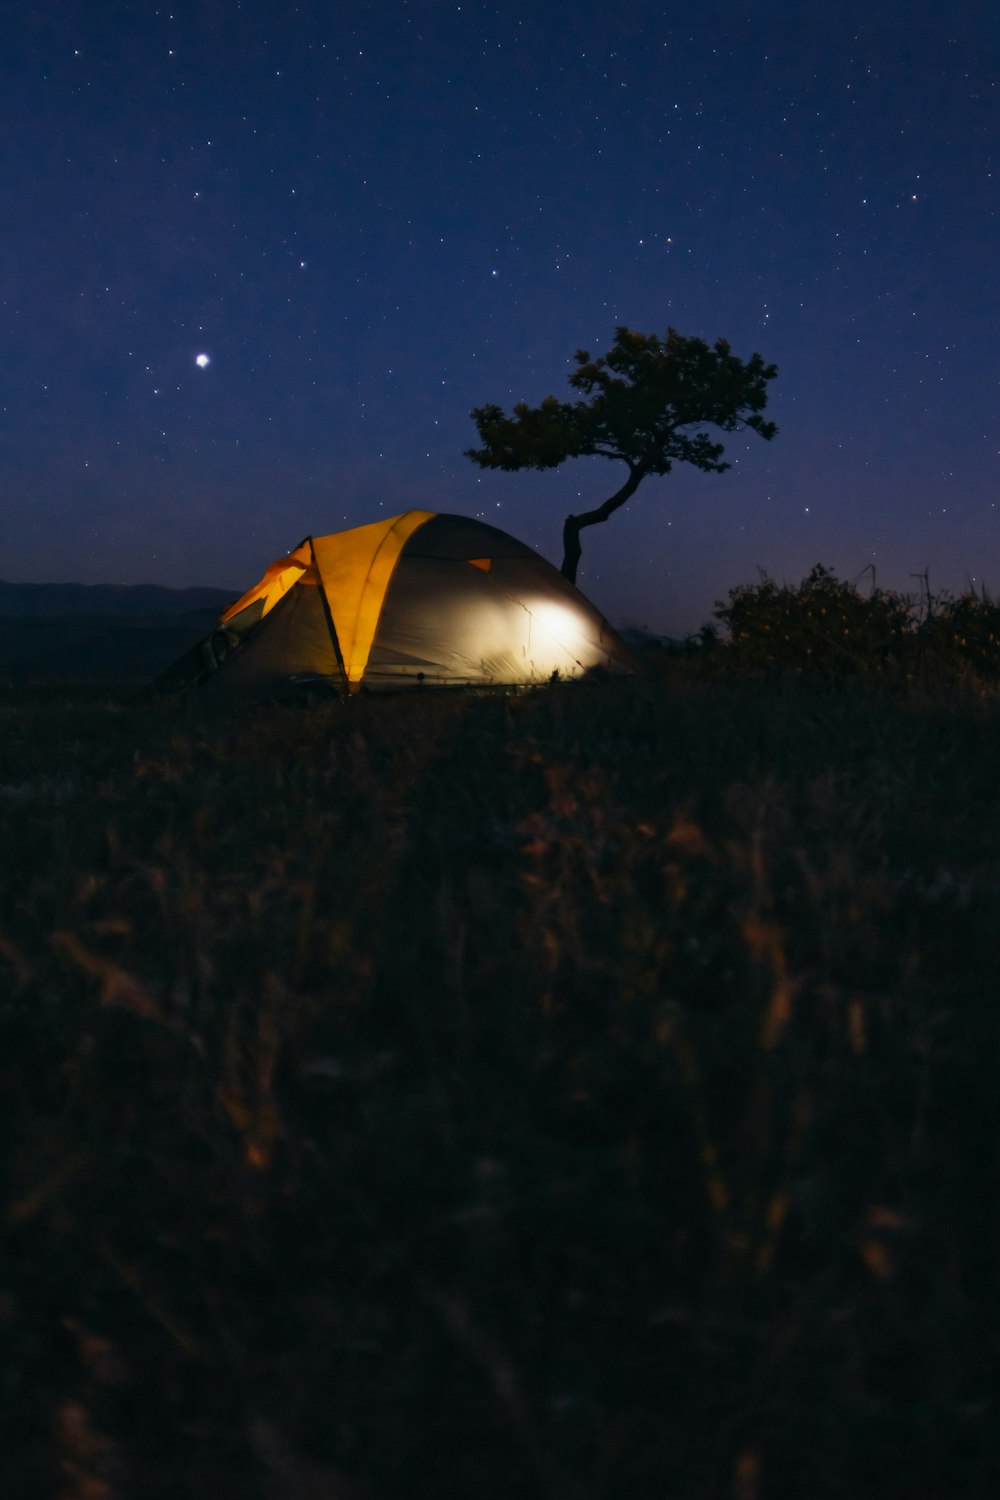 gray and yellow camping tent in the middle of grass field camping during nightime